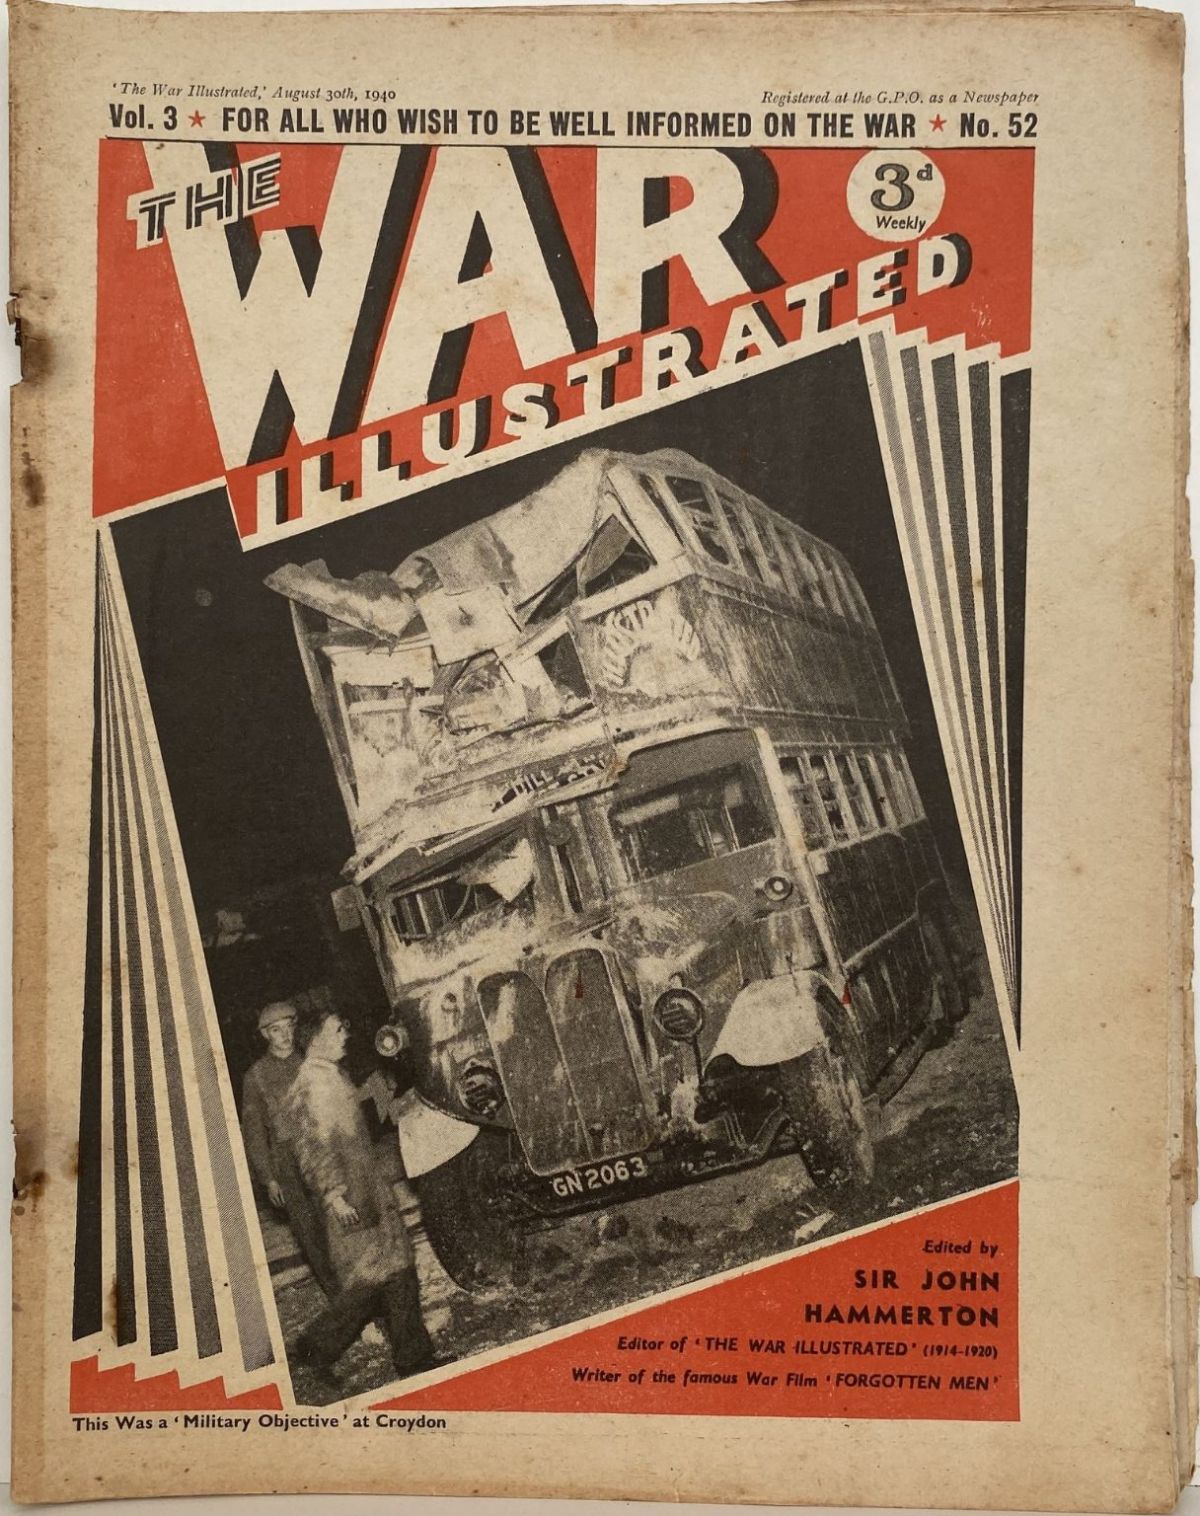 THE WAR ILLUSTRATED - Vol 3, No 52, 30th Aug 1940